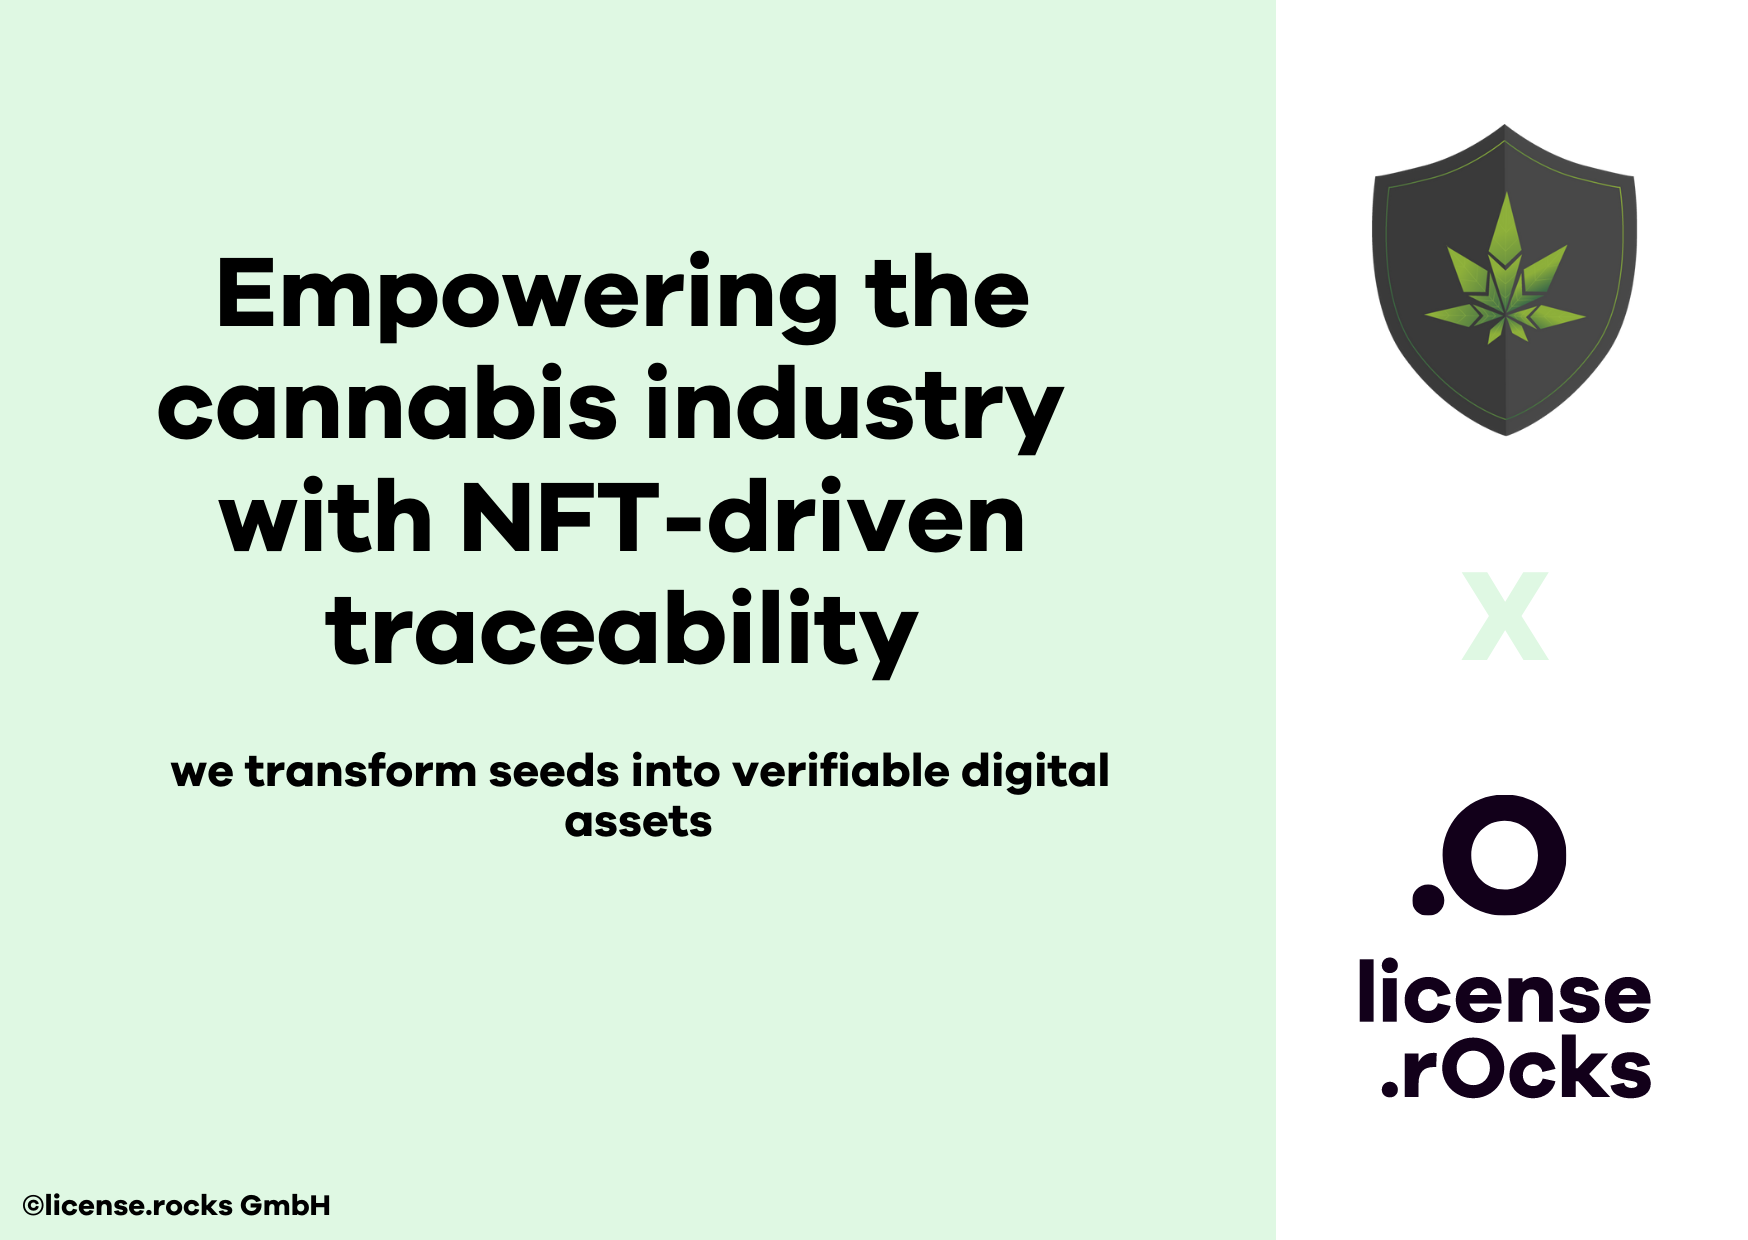 License.rocks and Trusted Source: A Powerful Partnership to Revolutionize the Cannabis Seed Supply Chain